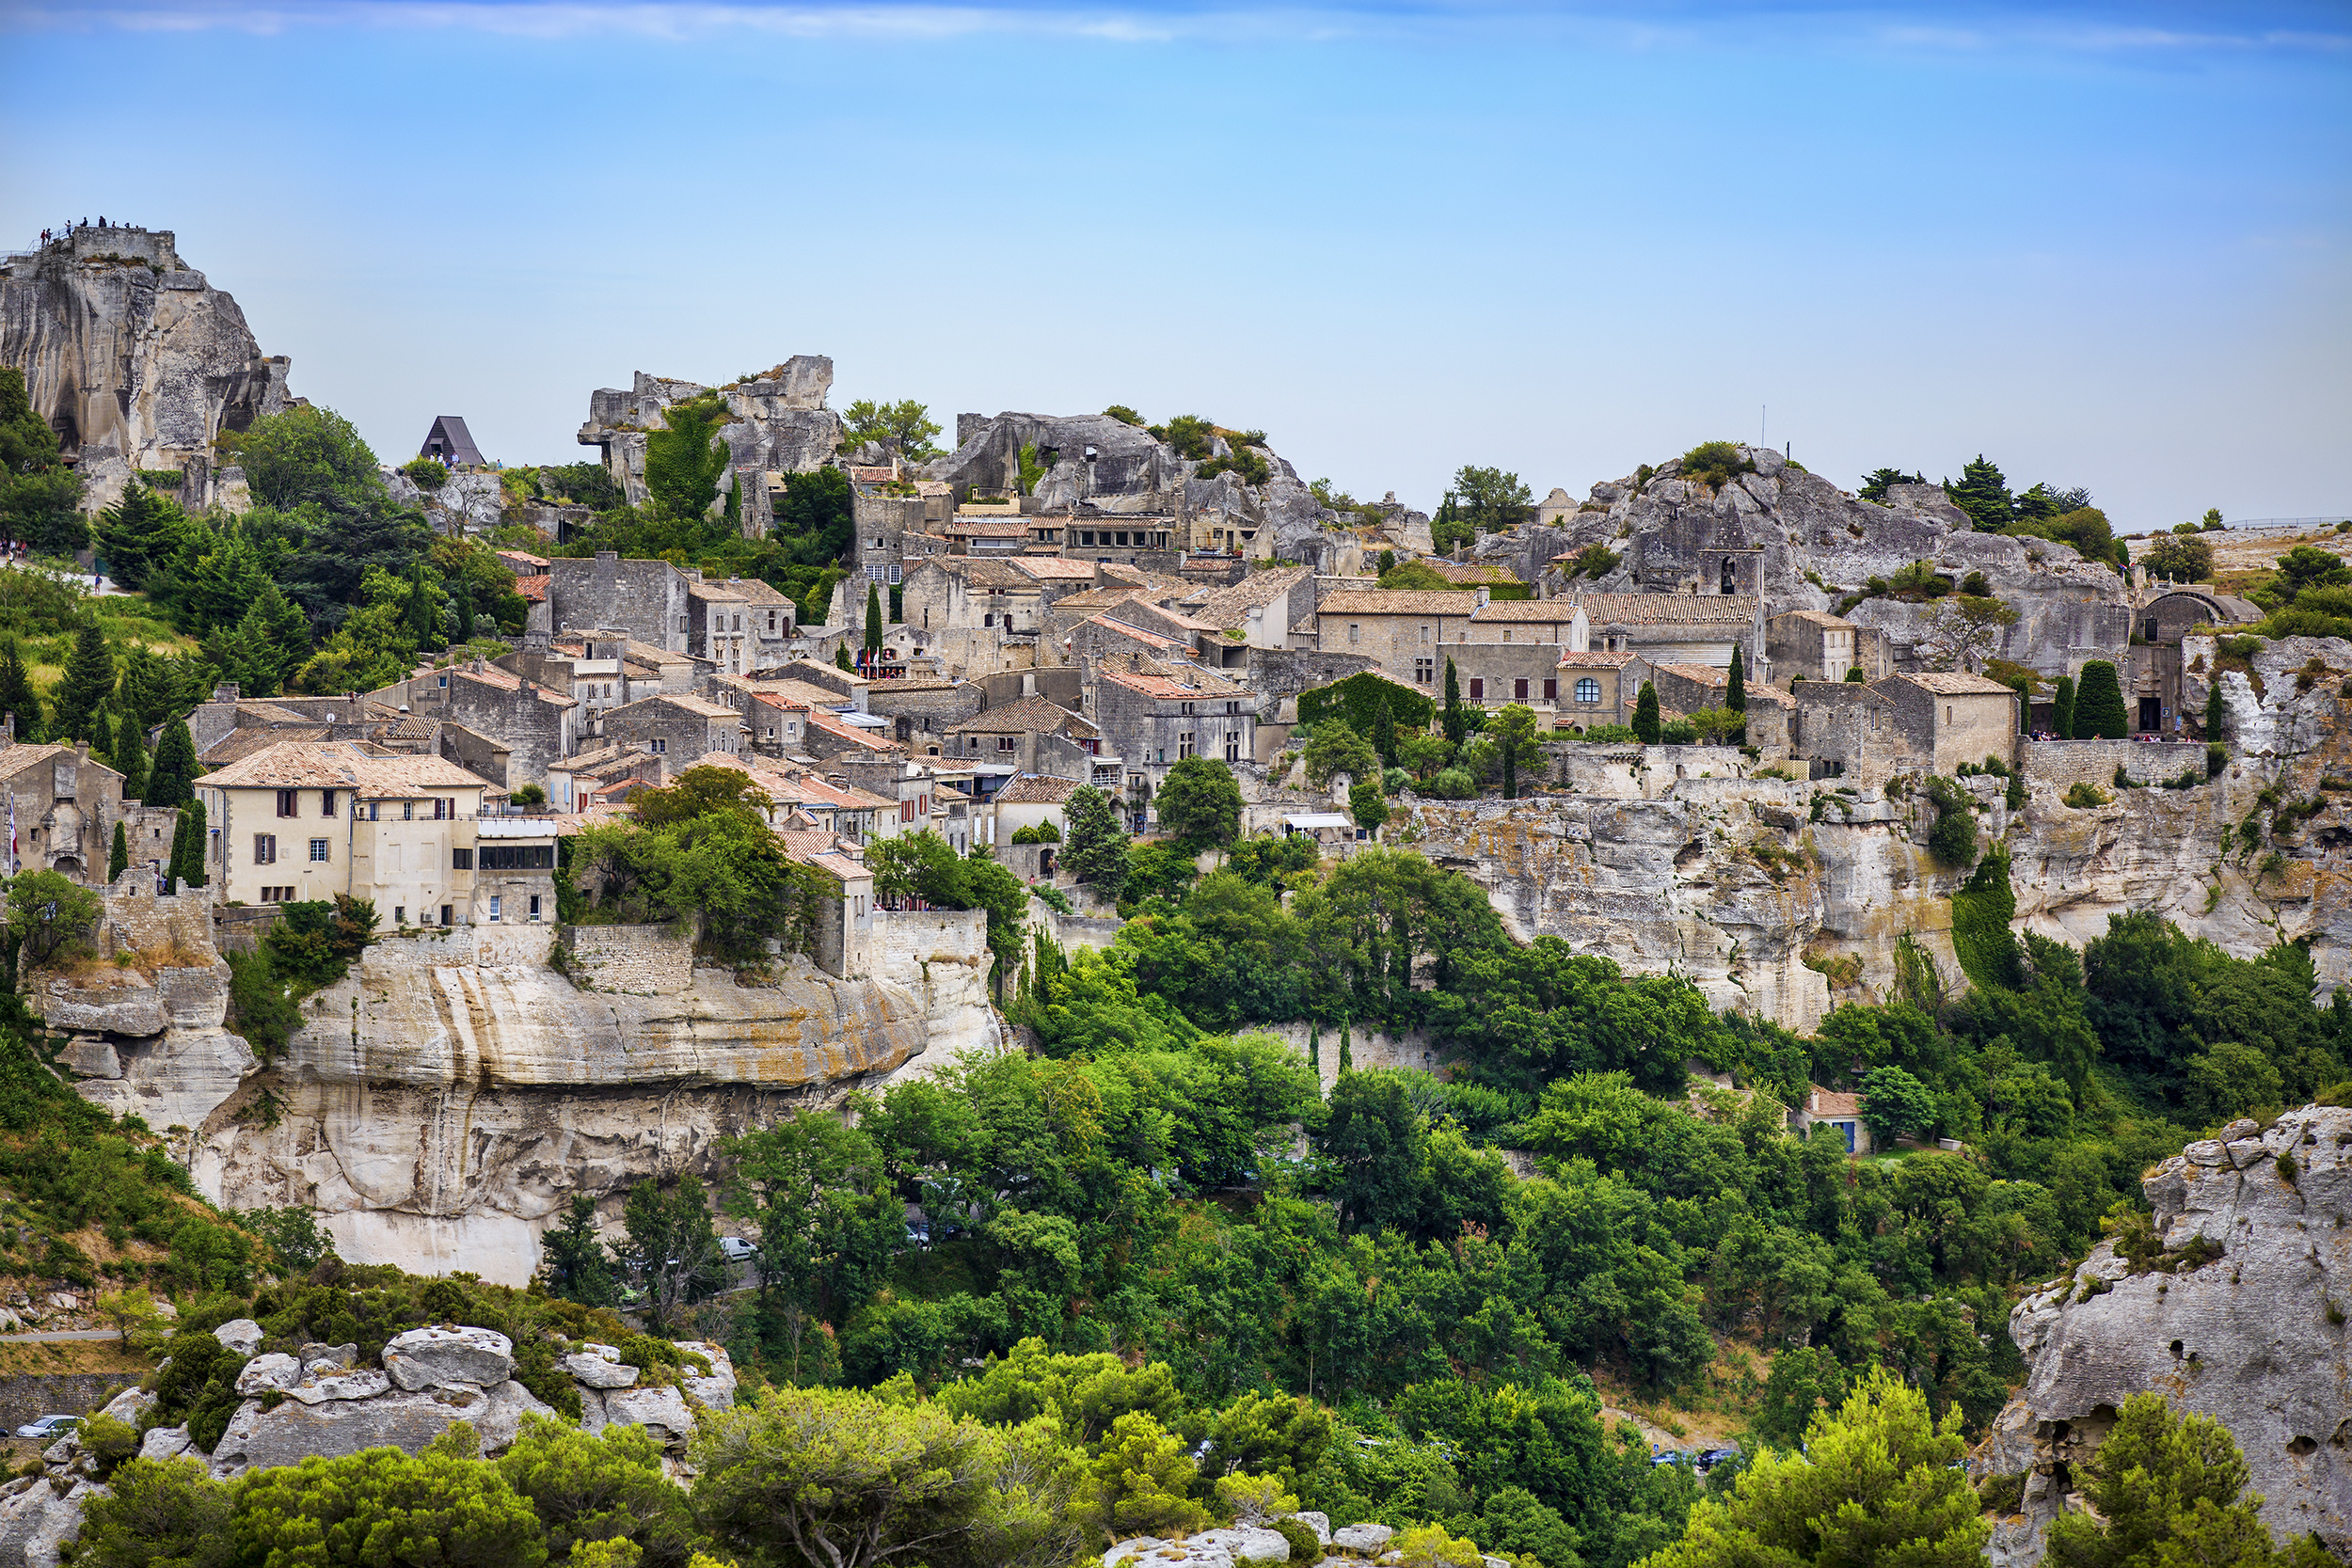 <p>One of the most popular small towns in Provence, Les Baux is frequented for a reason. The old rocky ruins of the fortified town are well-preserved and make for a fantastic place to visit.</p><p>You may also like: <a href='https://www.yardbarker.com/lifestyle/articles/20_ways_to_make_your_sleep_better_031924/s1__37417223'>20 ways to make your sleep better</a></p>